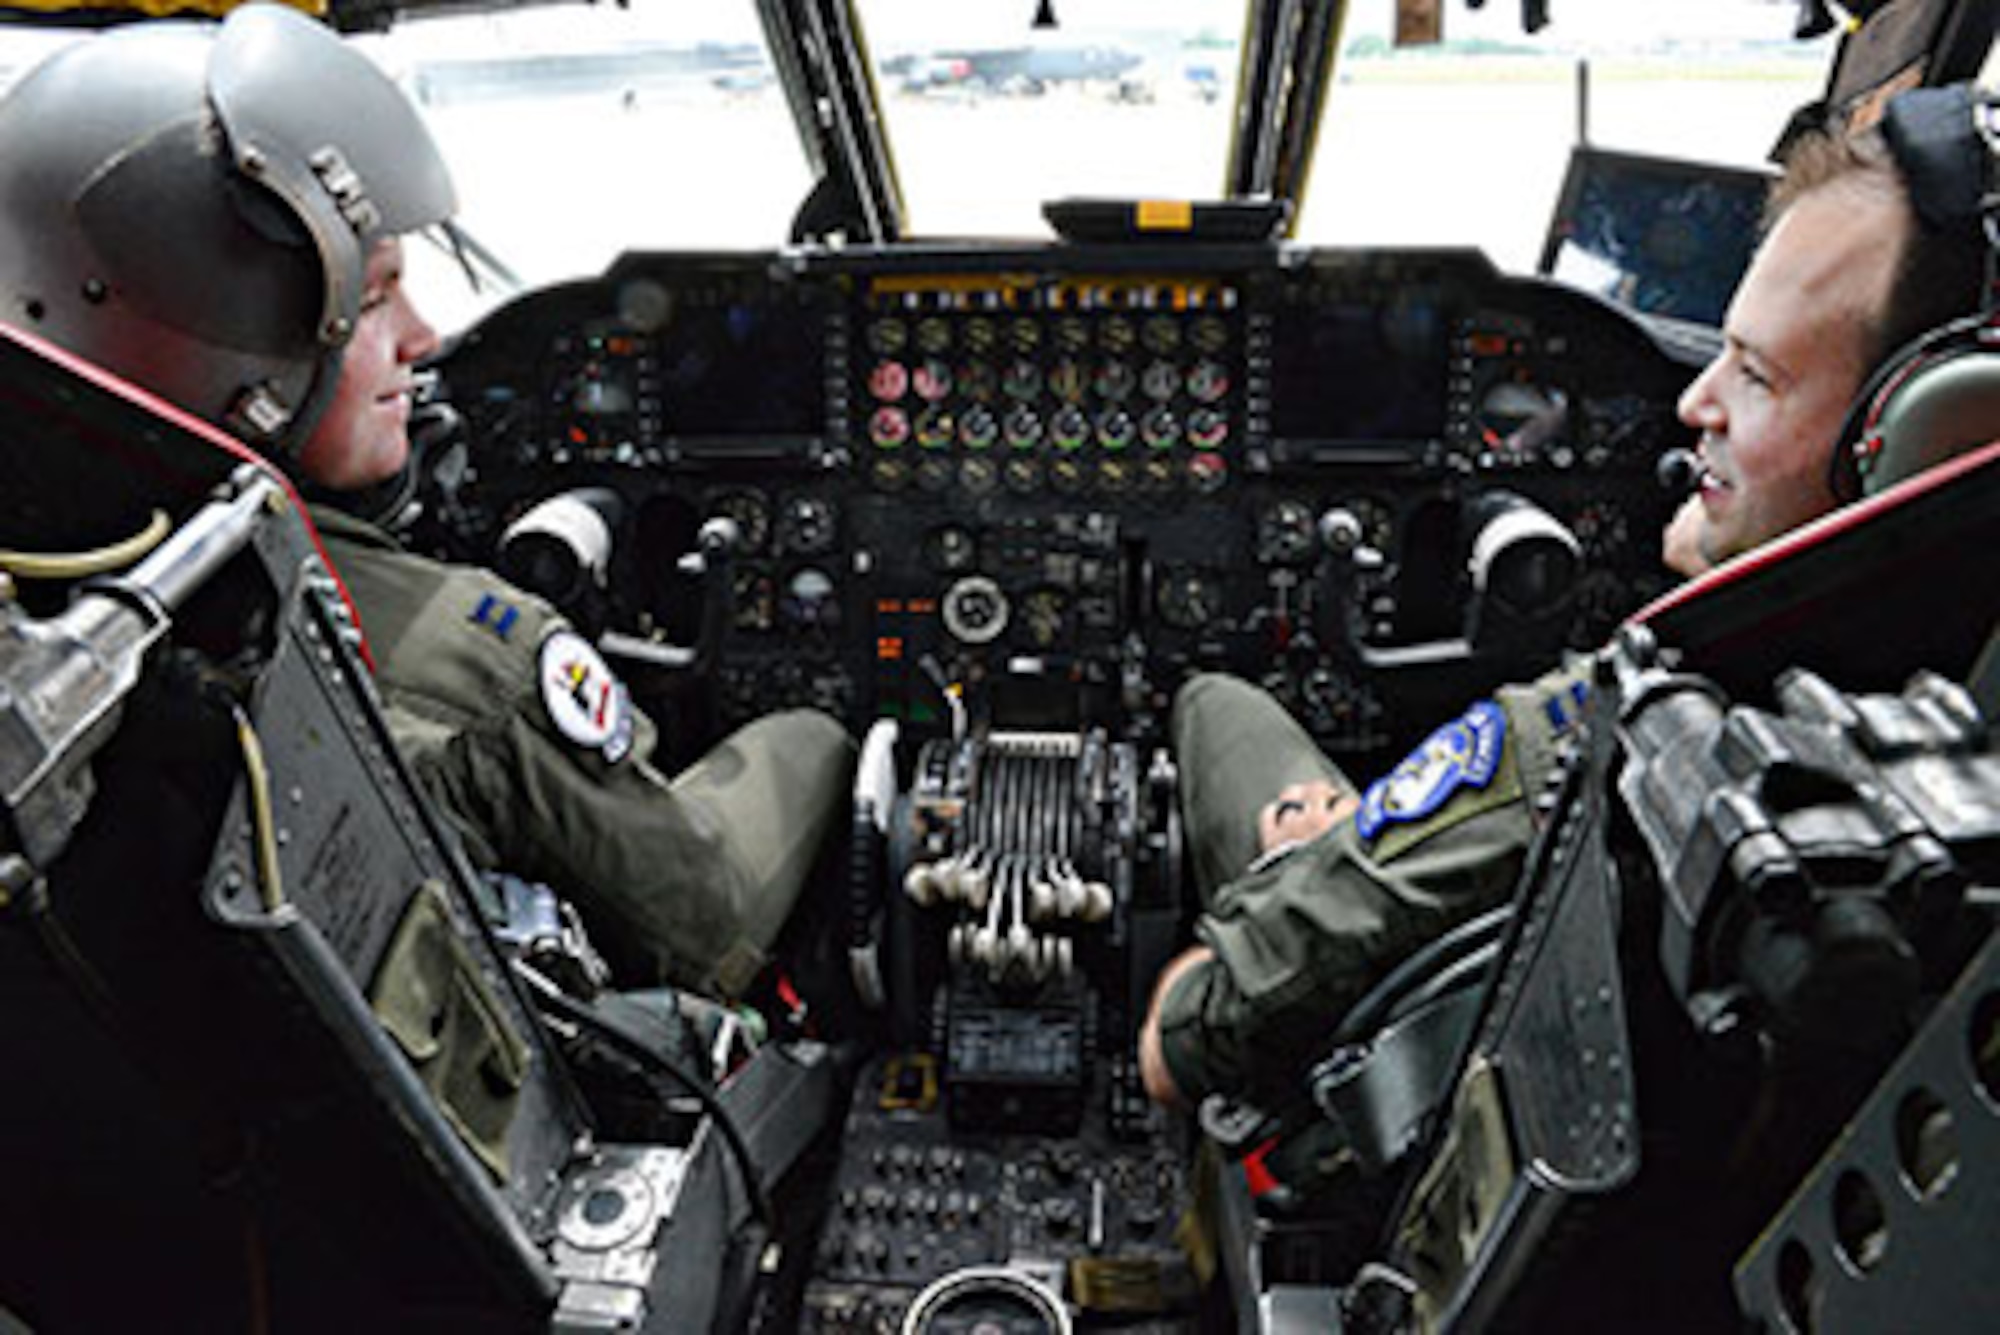 Capt. Shane Dow, aircraft commander, left, and Capt. Kevin Wiemann, co-pilot, both with the 20th Bomb Squadron out of Barksdale Air Force Base, La., perform pre-flight checks onboard the 12th B-52 to receive the CONECT upgrade. The digital upgrade will allow the flightcrew to send and receive almost instant data vital to their missions. (Air Force photo by Kelly White/Released)